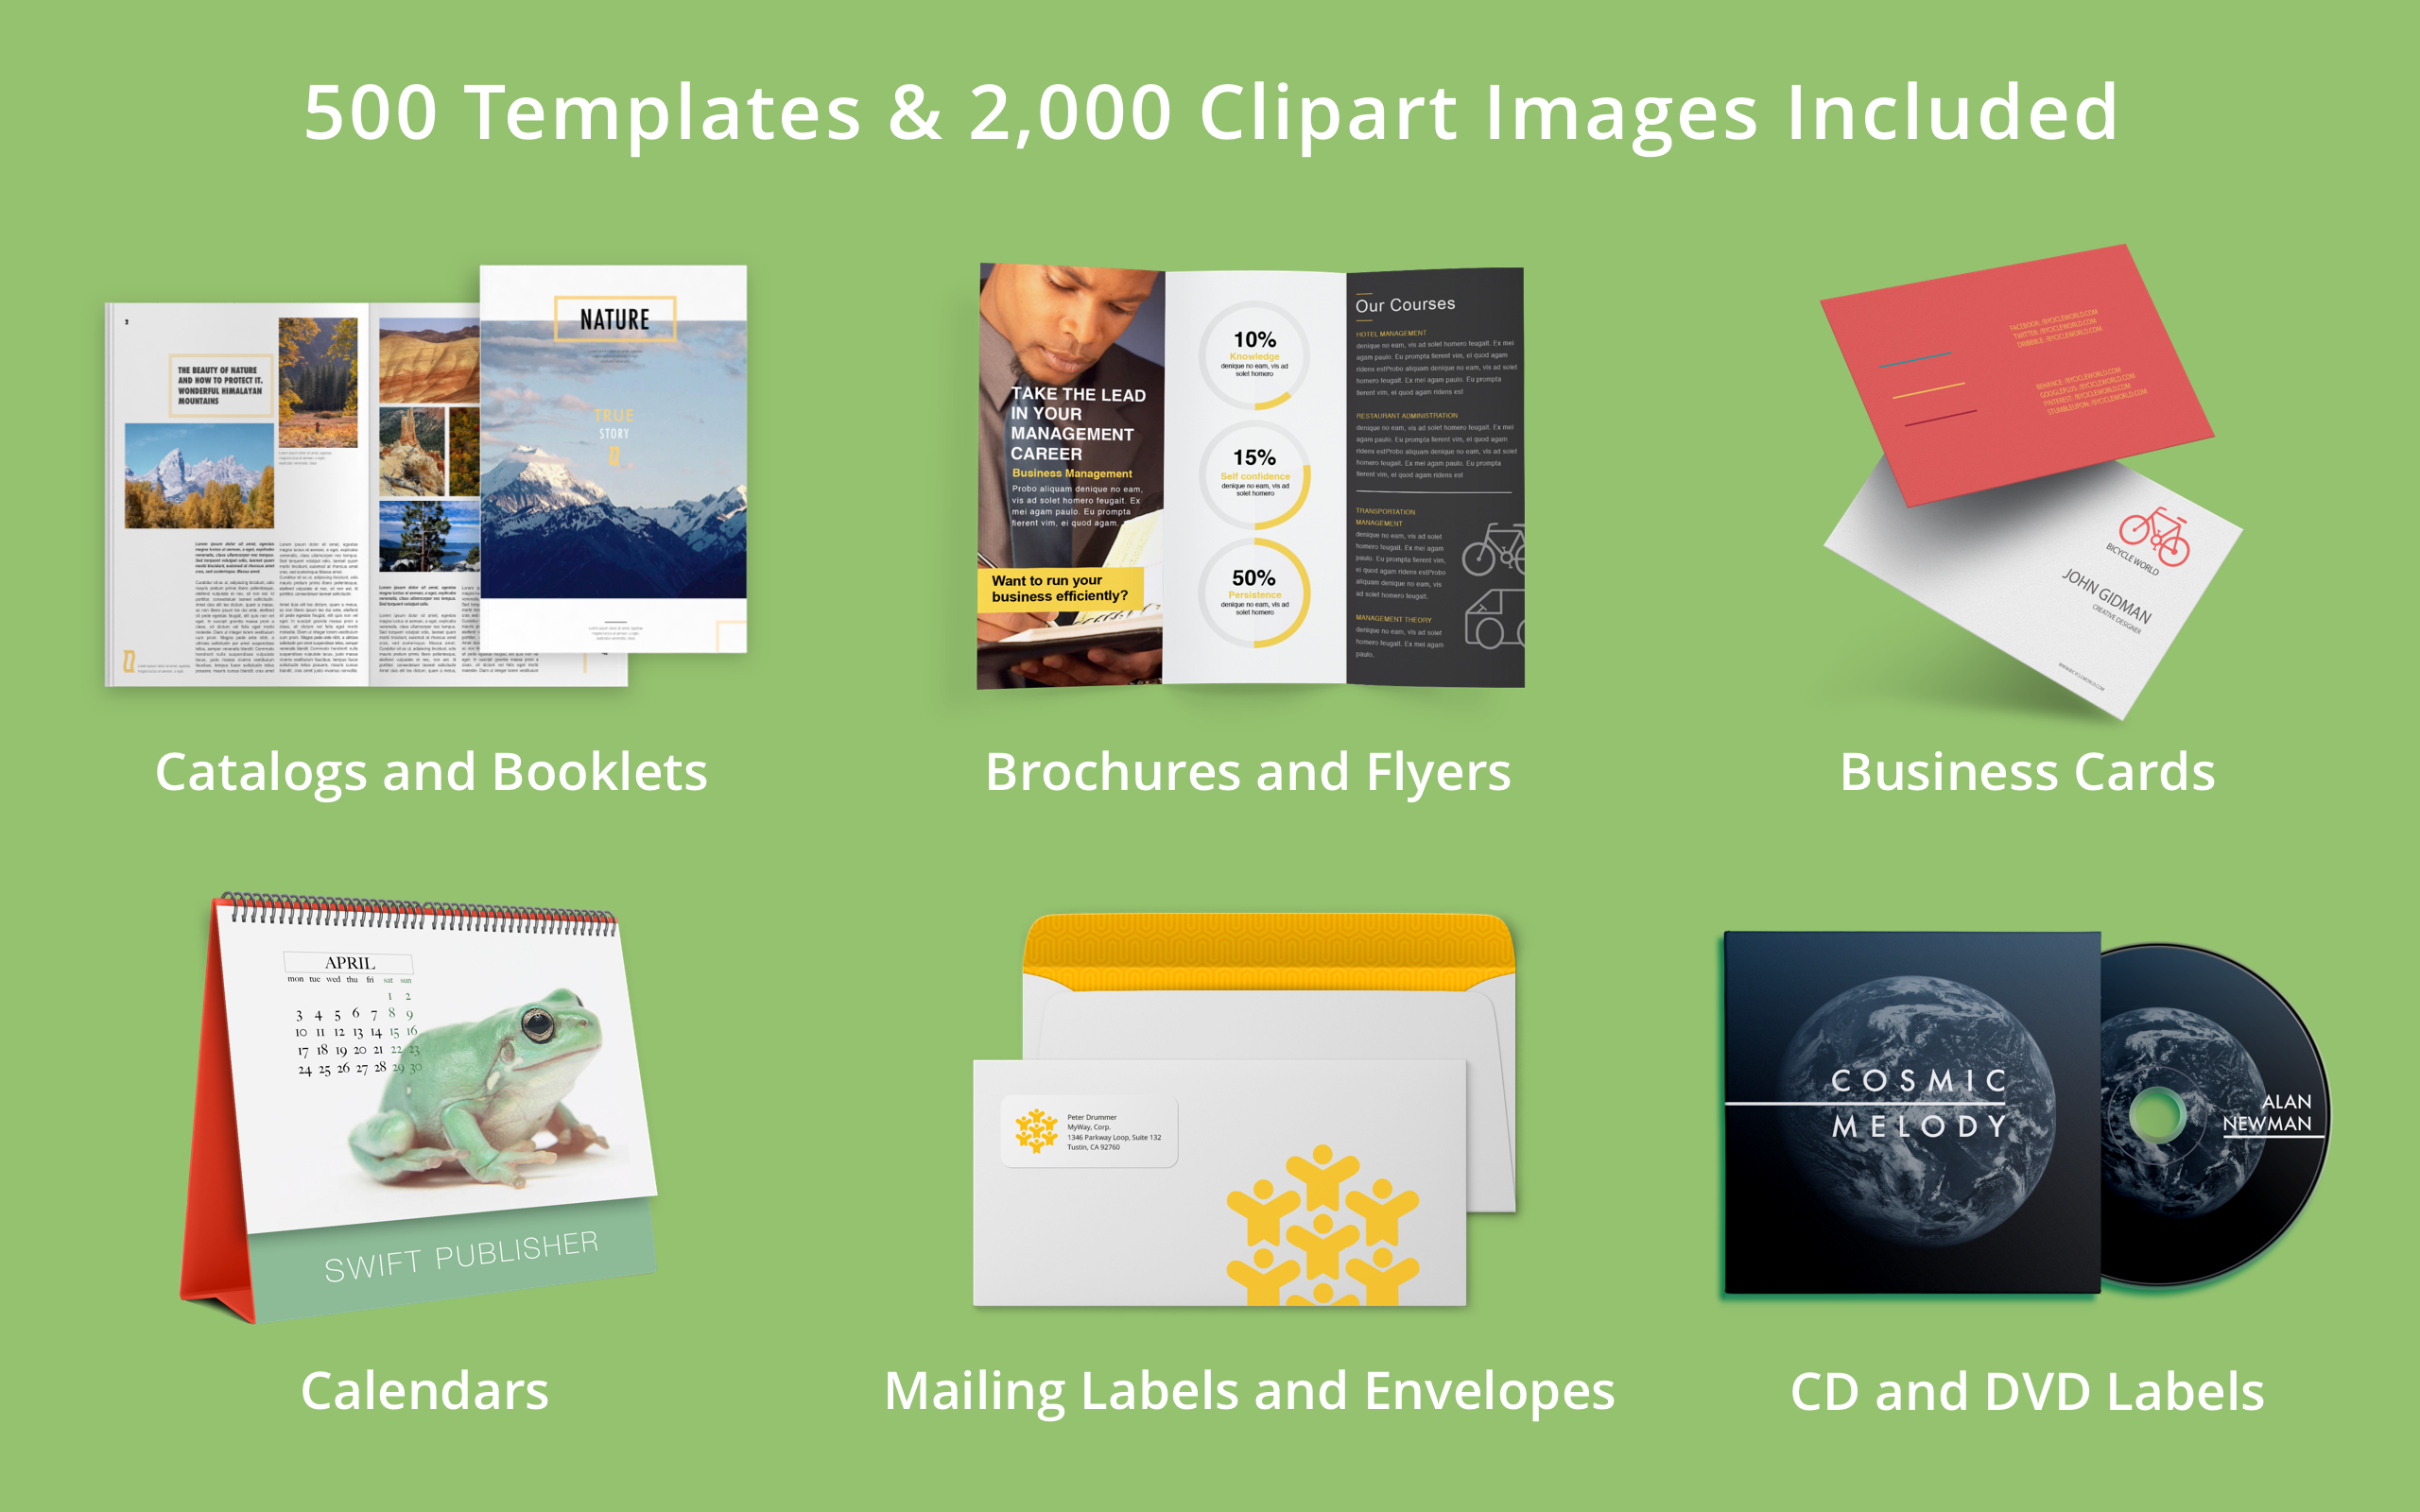 swift publisher additional cliparts